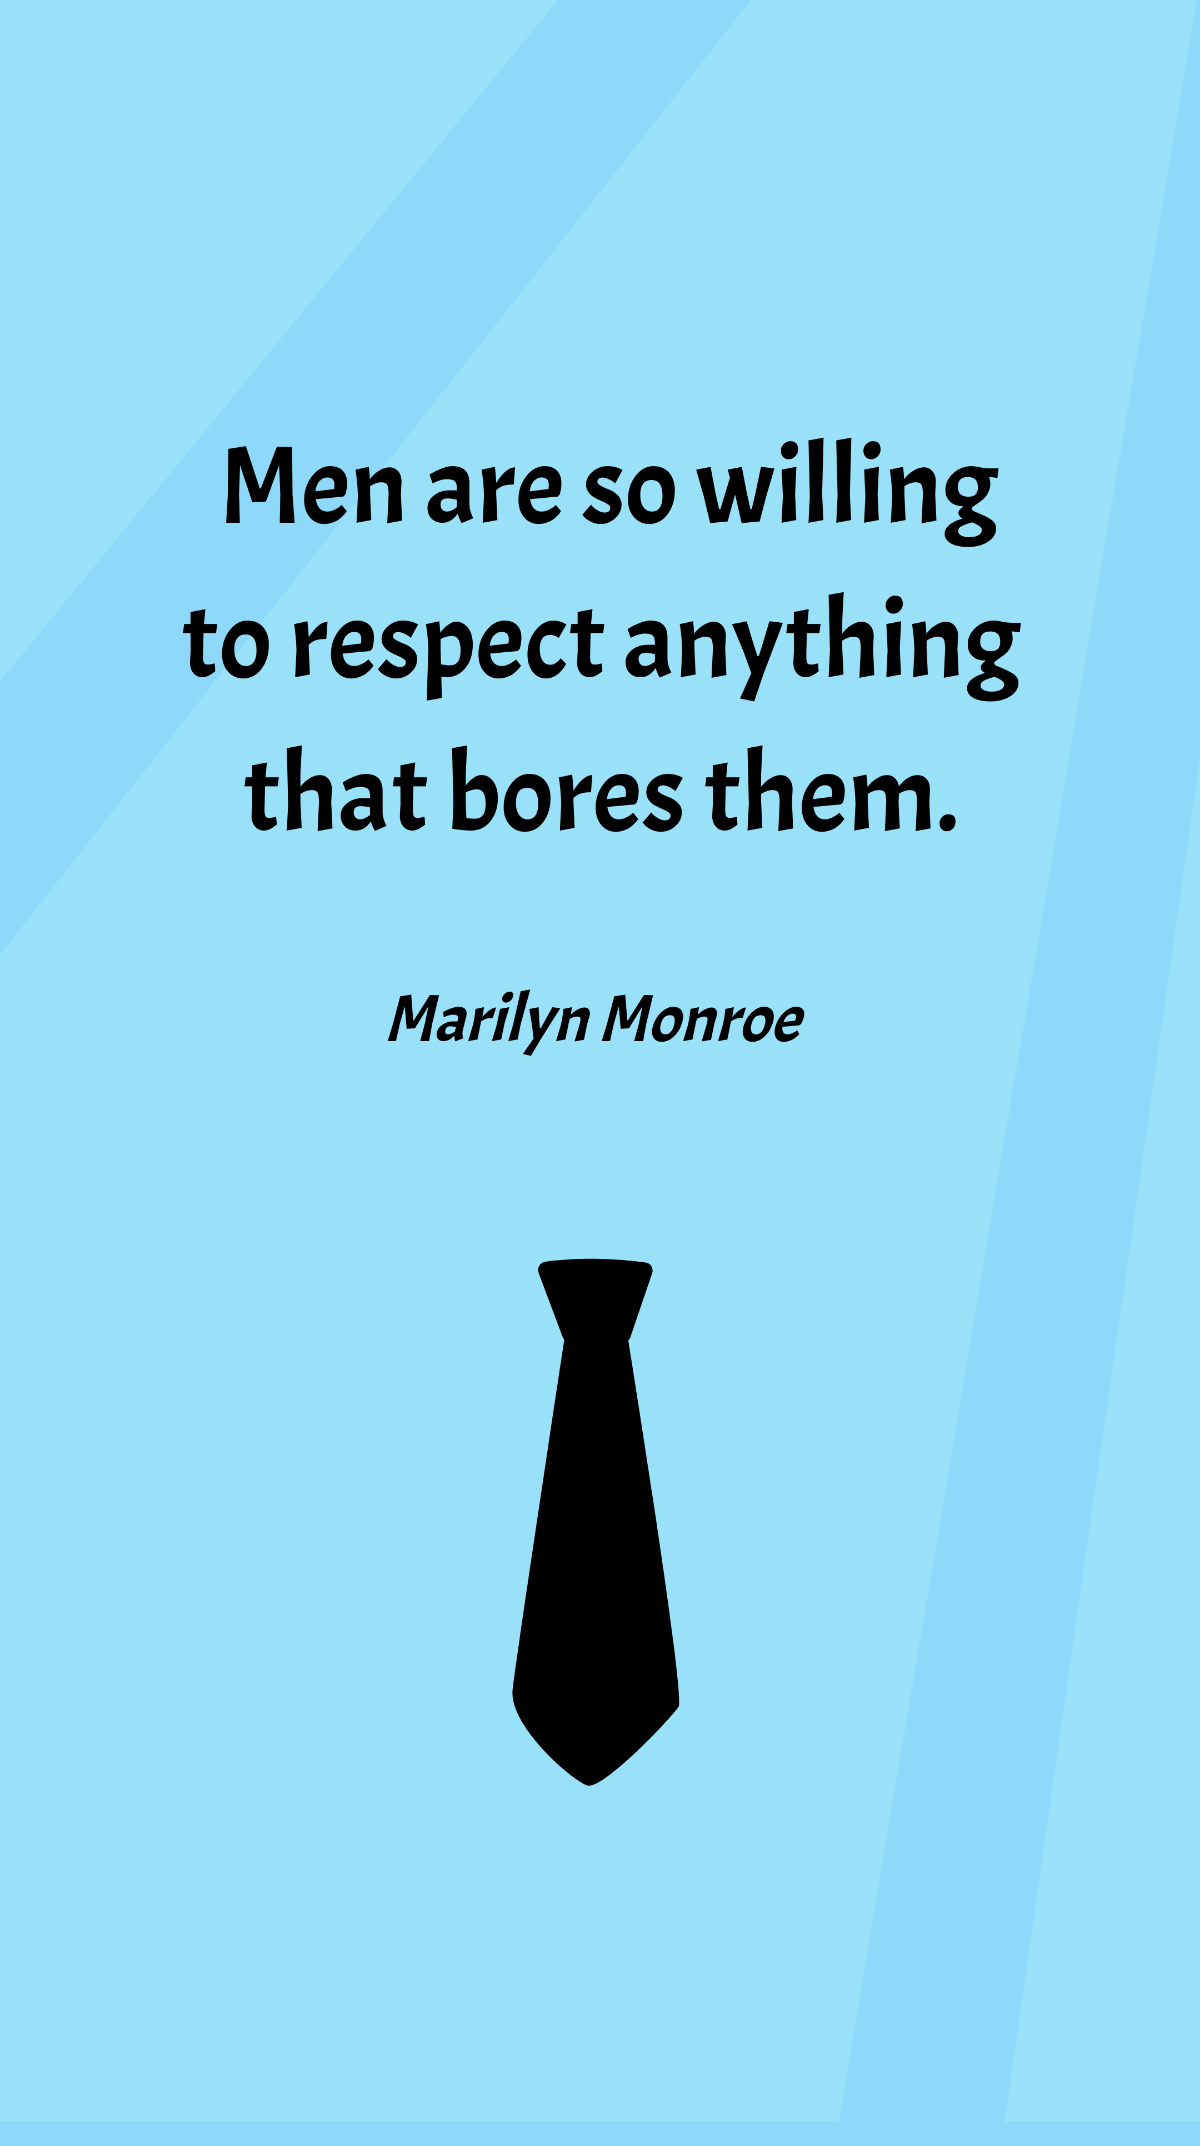 Marilyn Monroe- Men are so willing to respect anything that bores them. Template